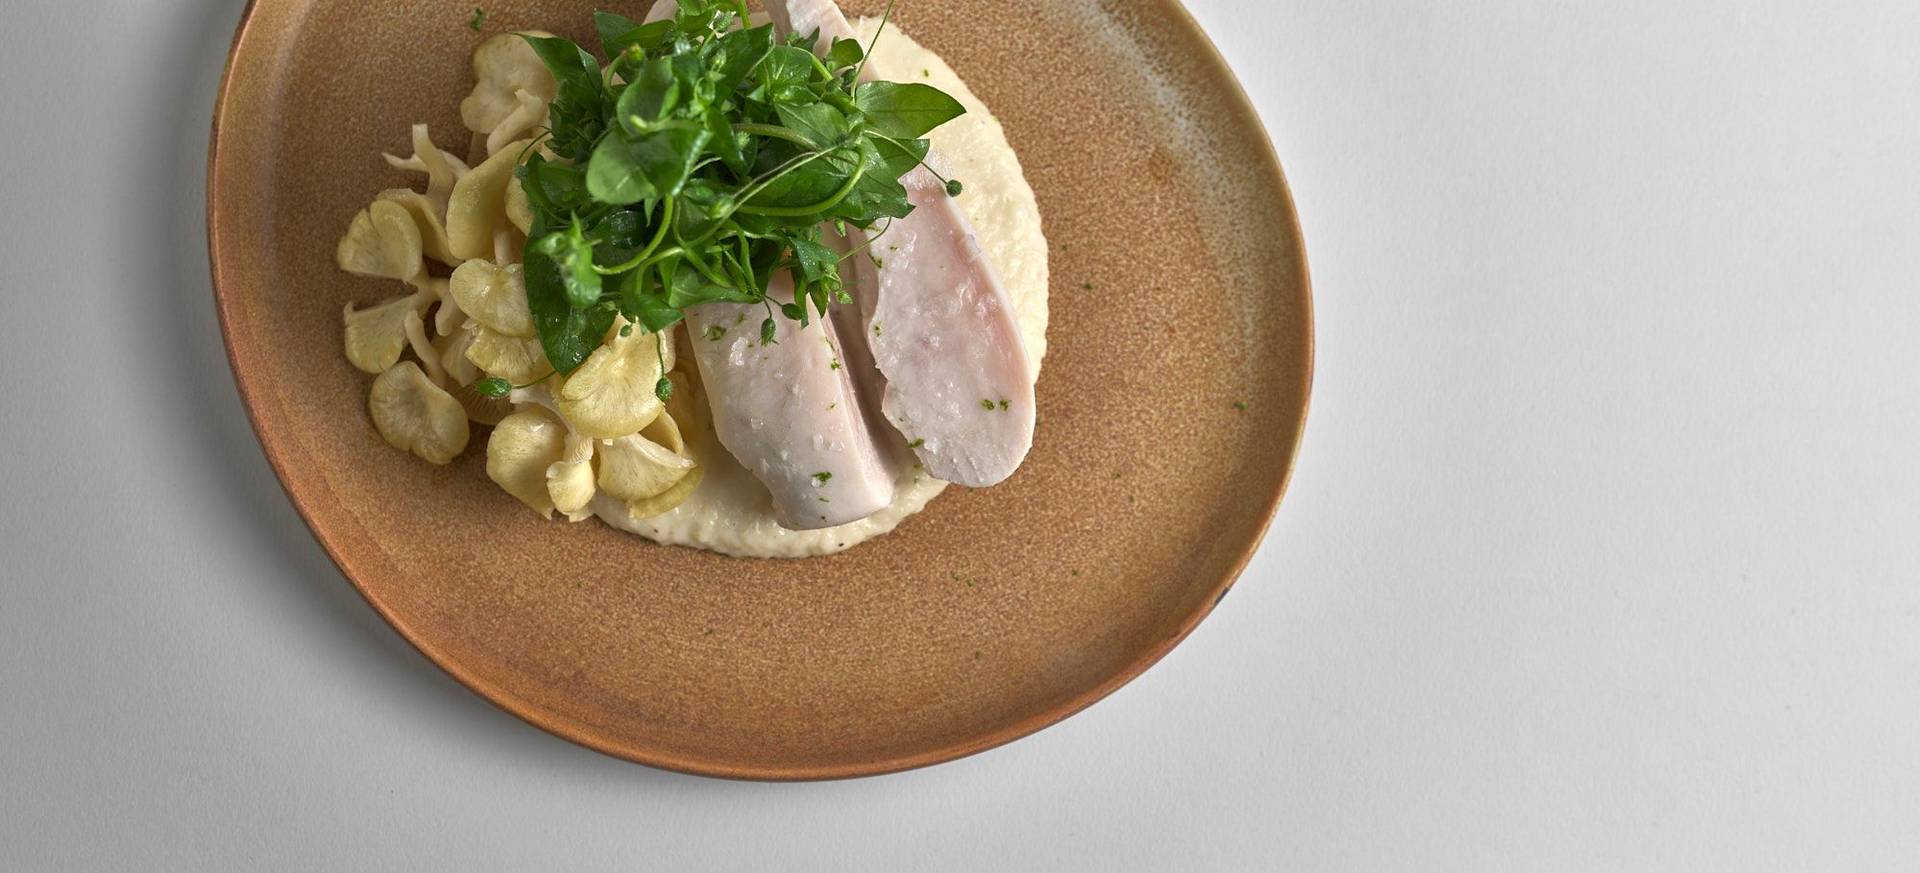 Coconut Poached Chicken with Black Salsify, Chickweed & Lemon Mushrooms 